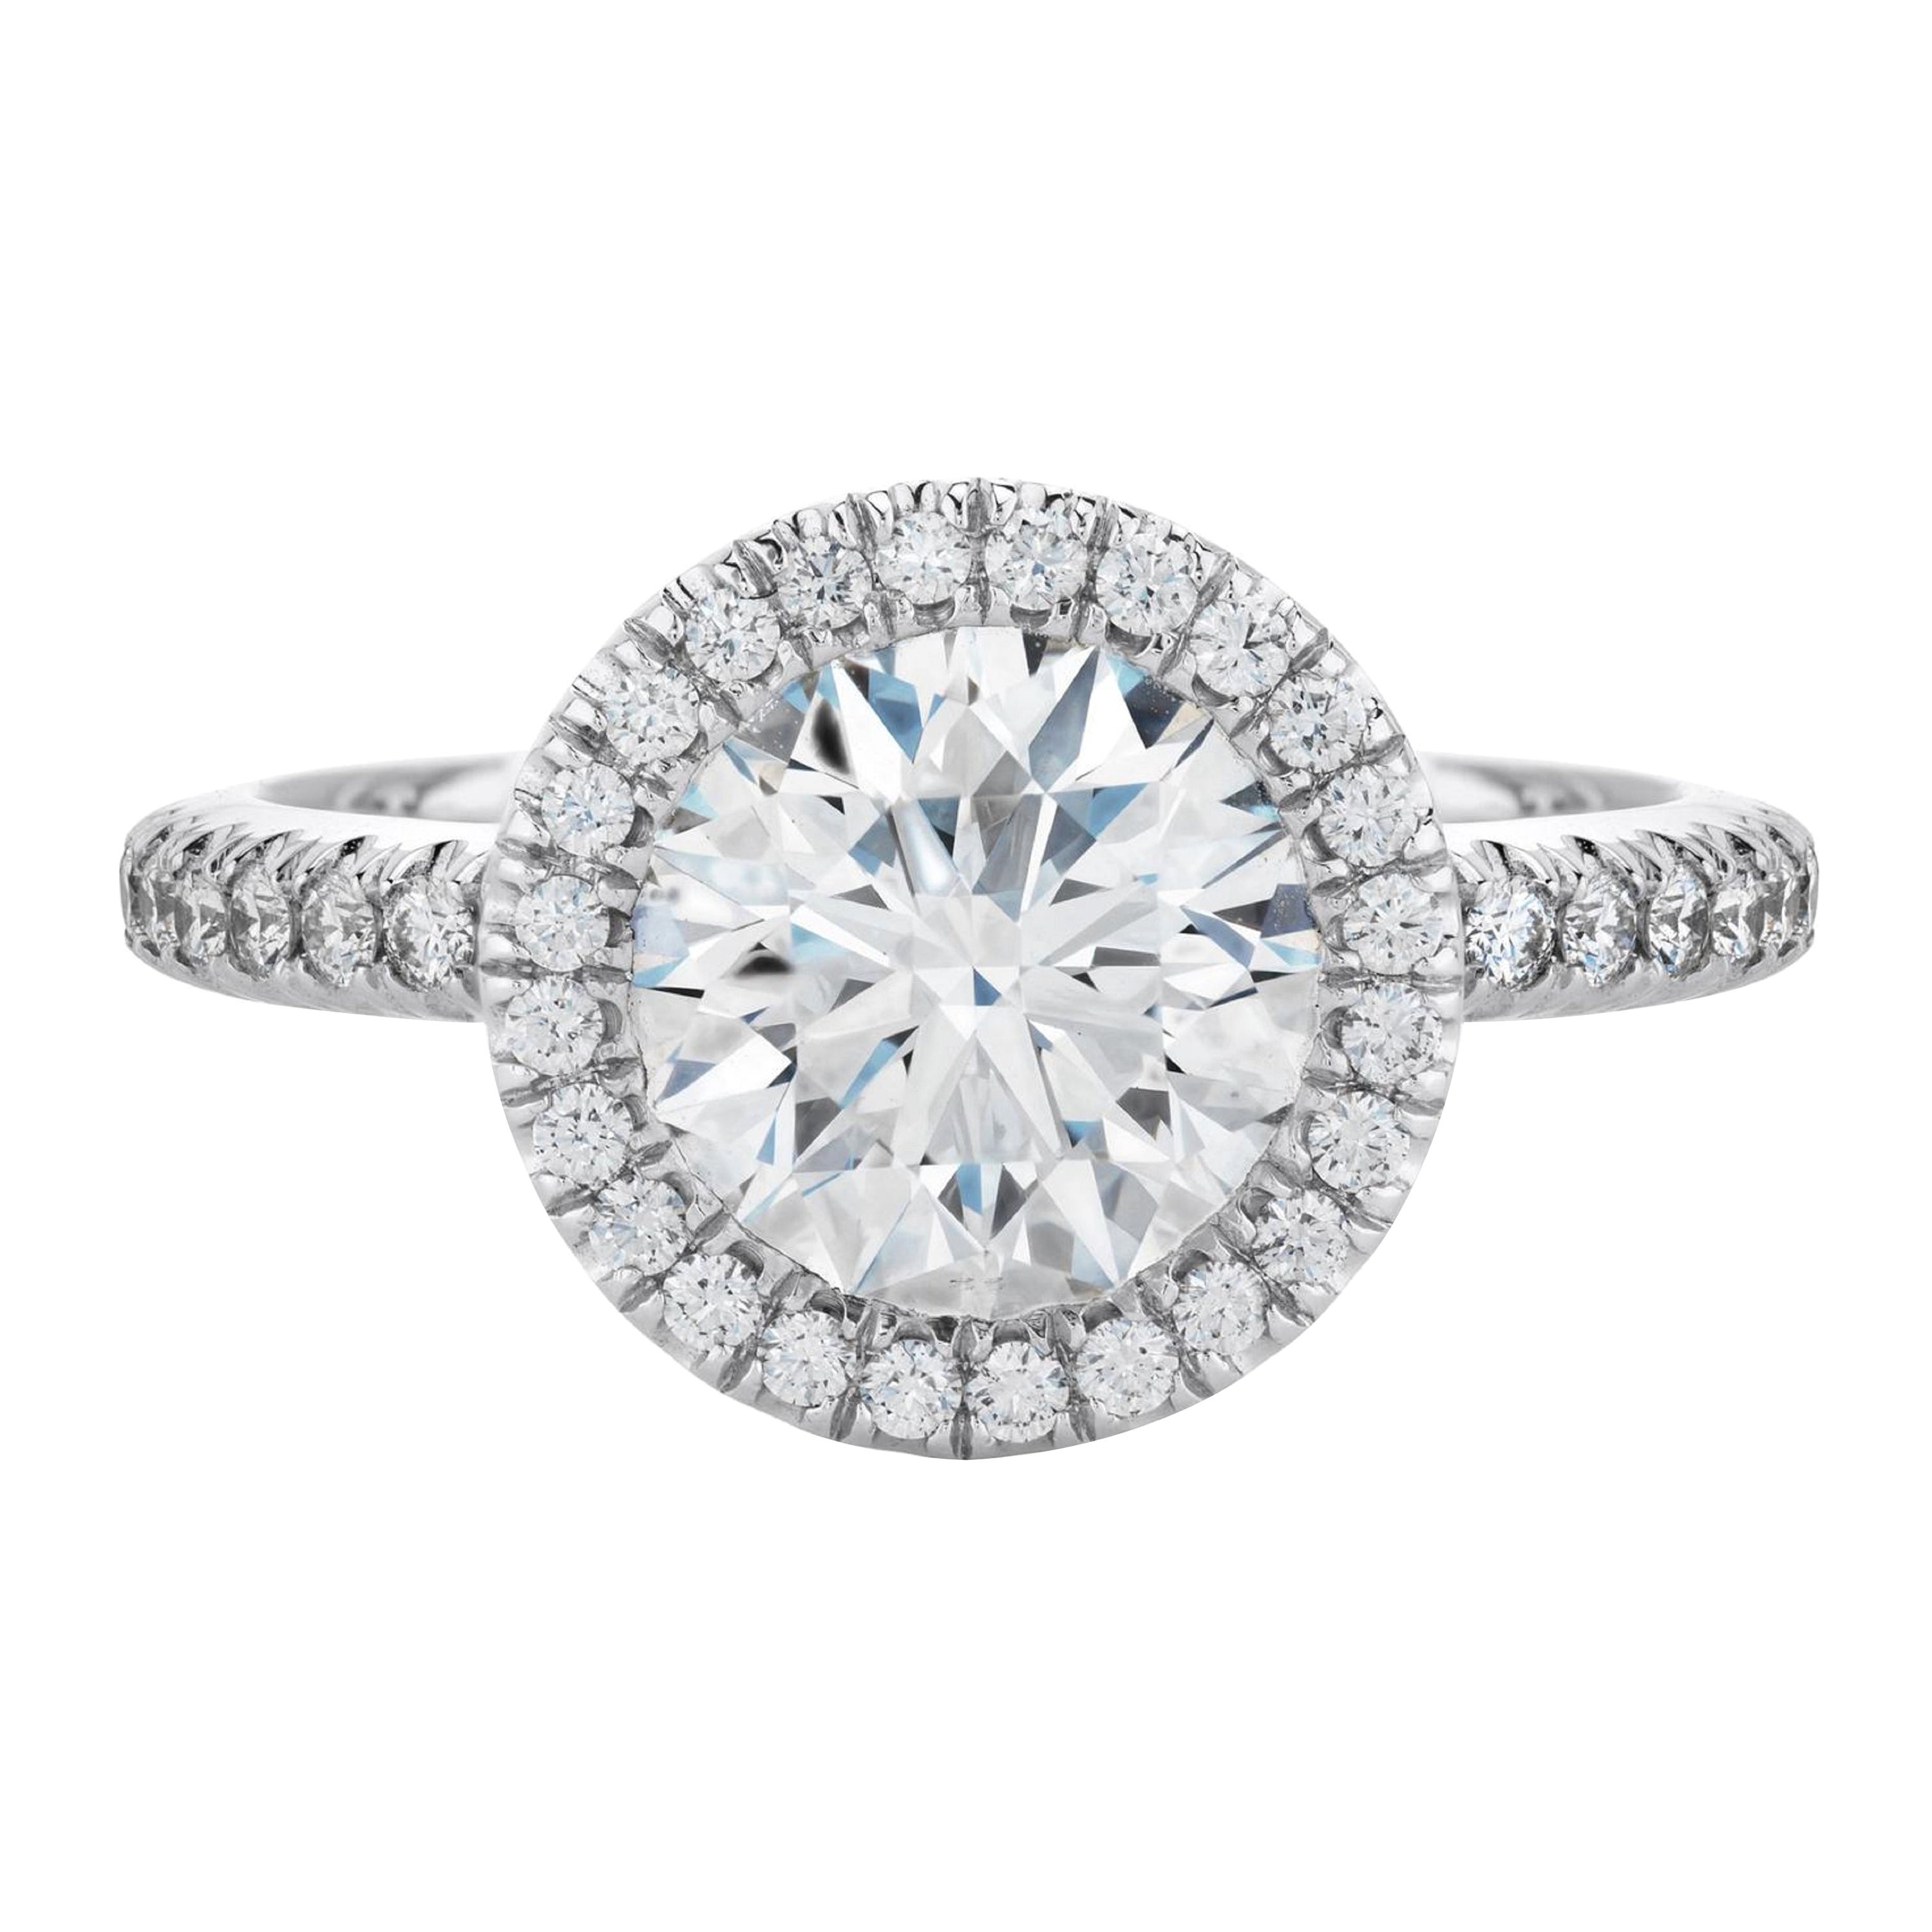 Flawless F Color GIA Certified Halo 2 Carat Round Brilliant Cut Diamond Ring